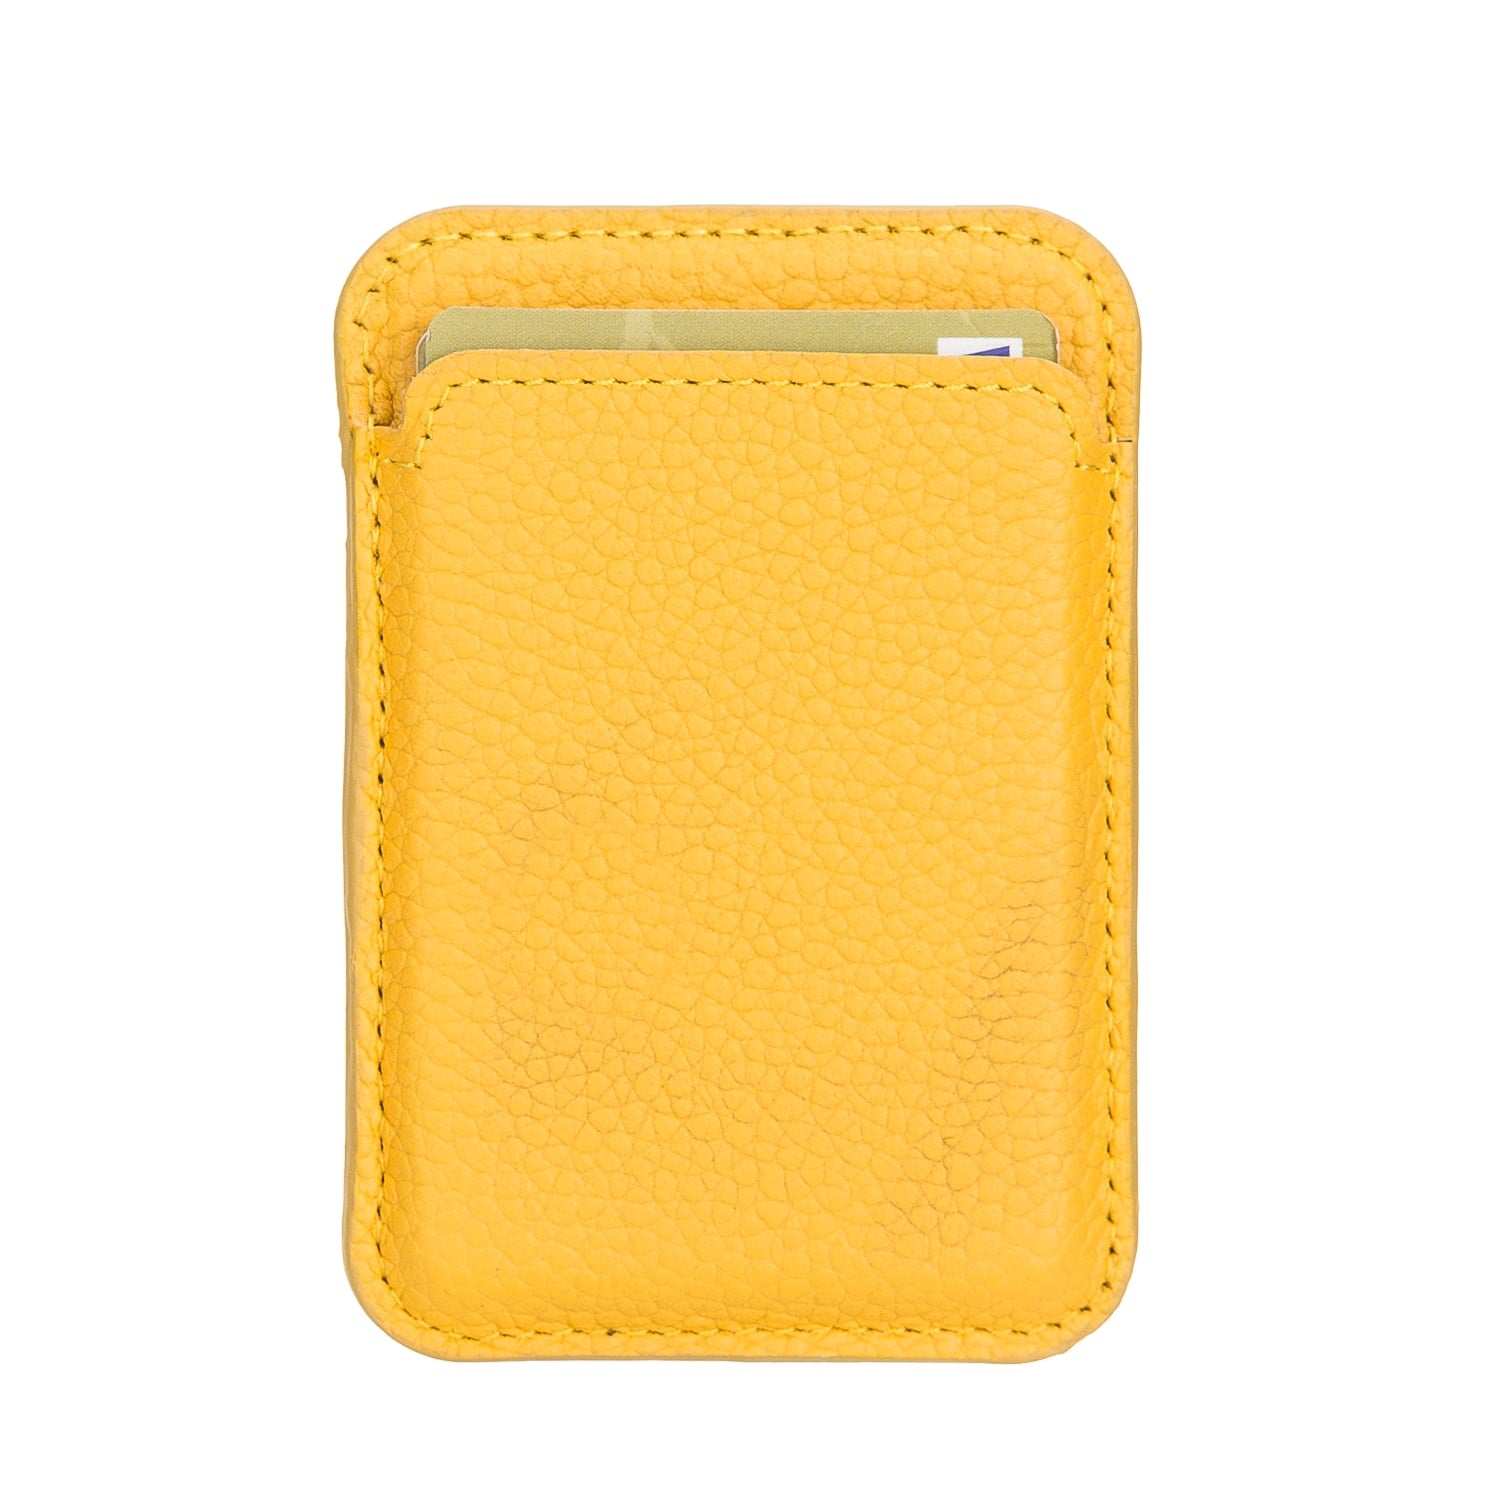 Yellow Leather Apple MagSafe Card Holder Magnetic Wallet for iPhone - Bomonti -2